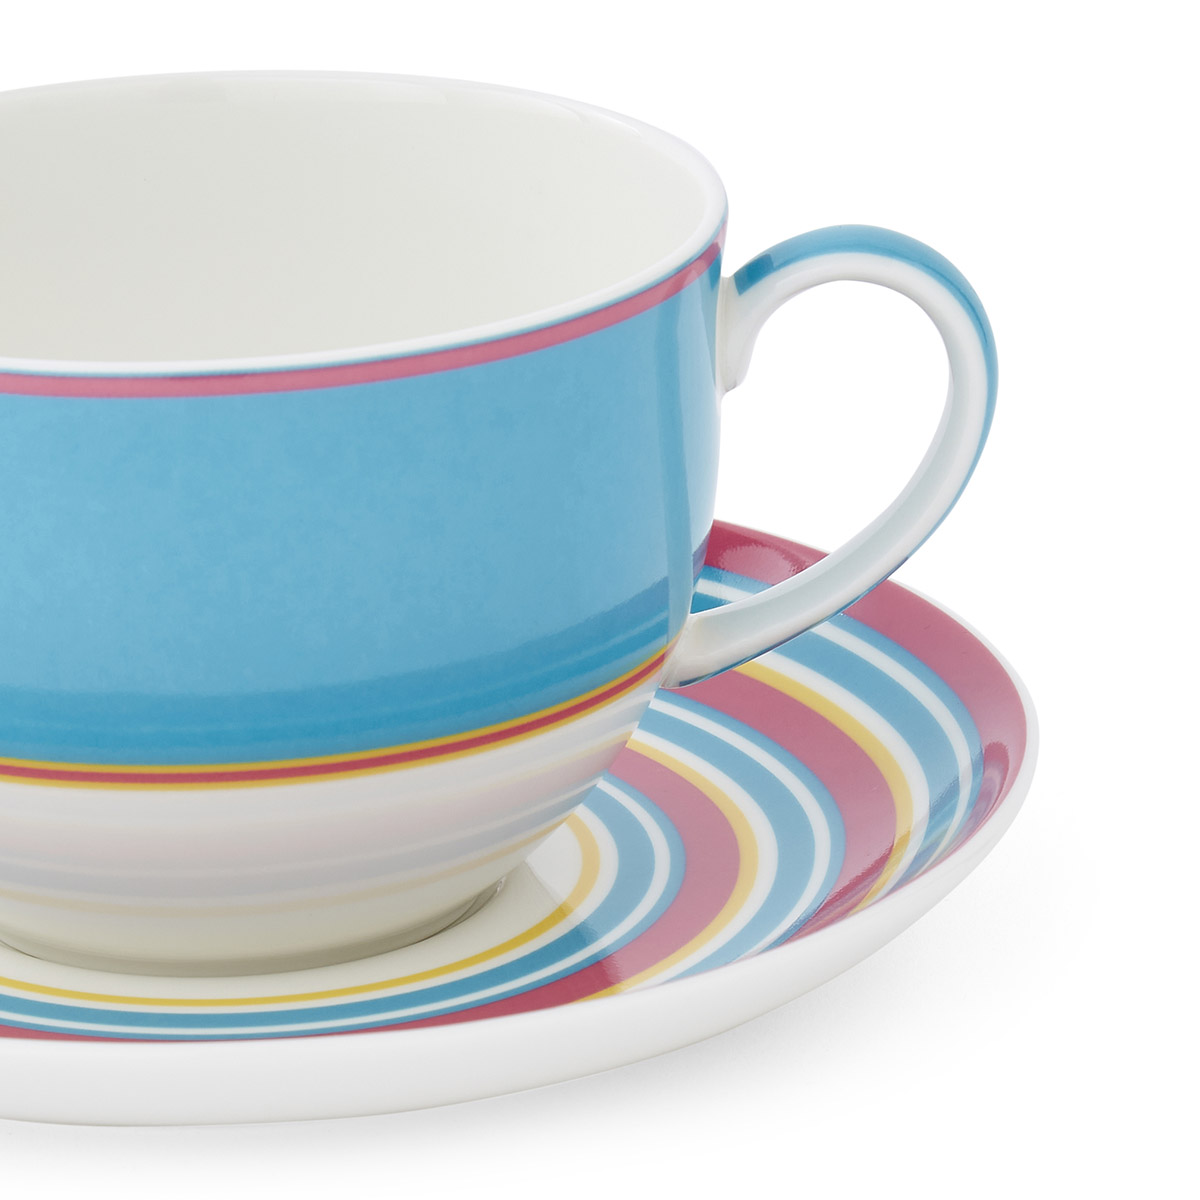 Kit Kemp Calypso Teacup & Saucer - Turquoise image number null